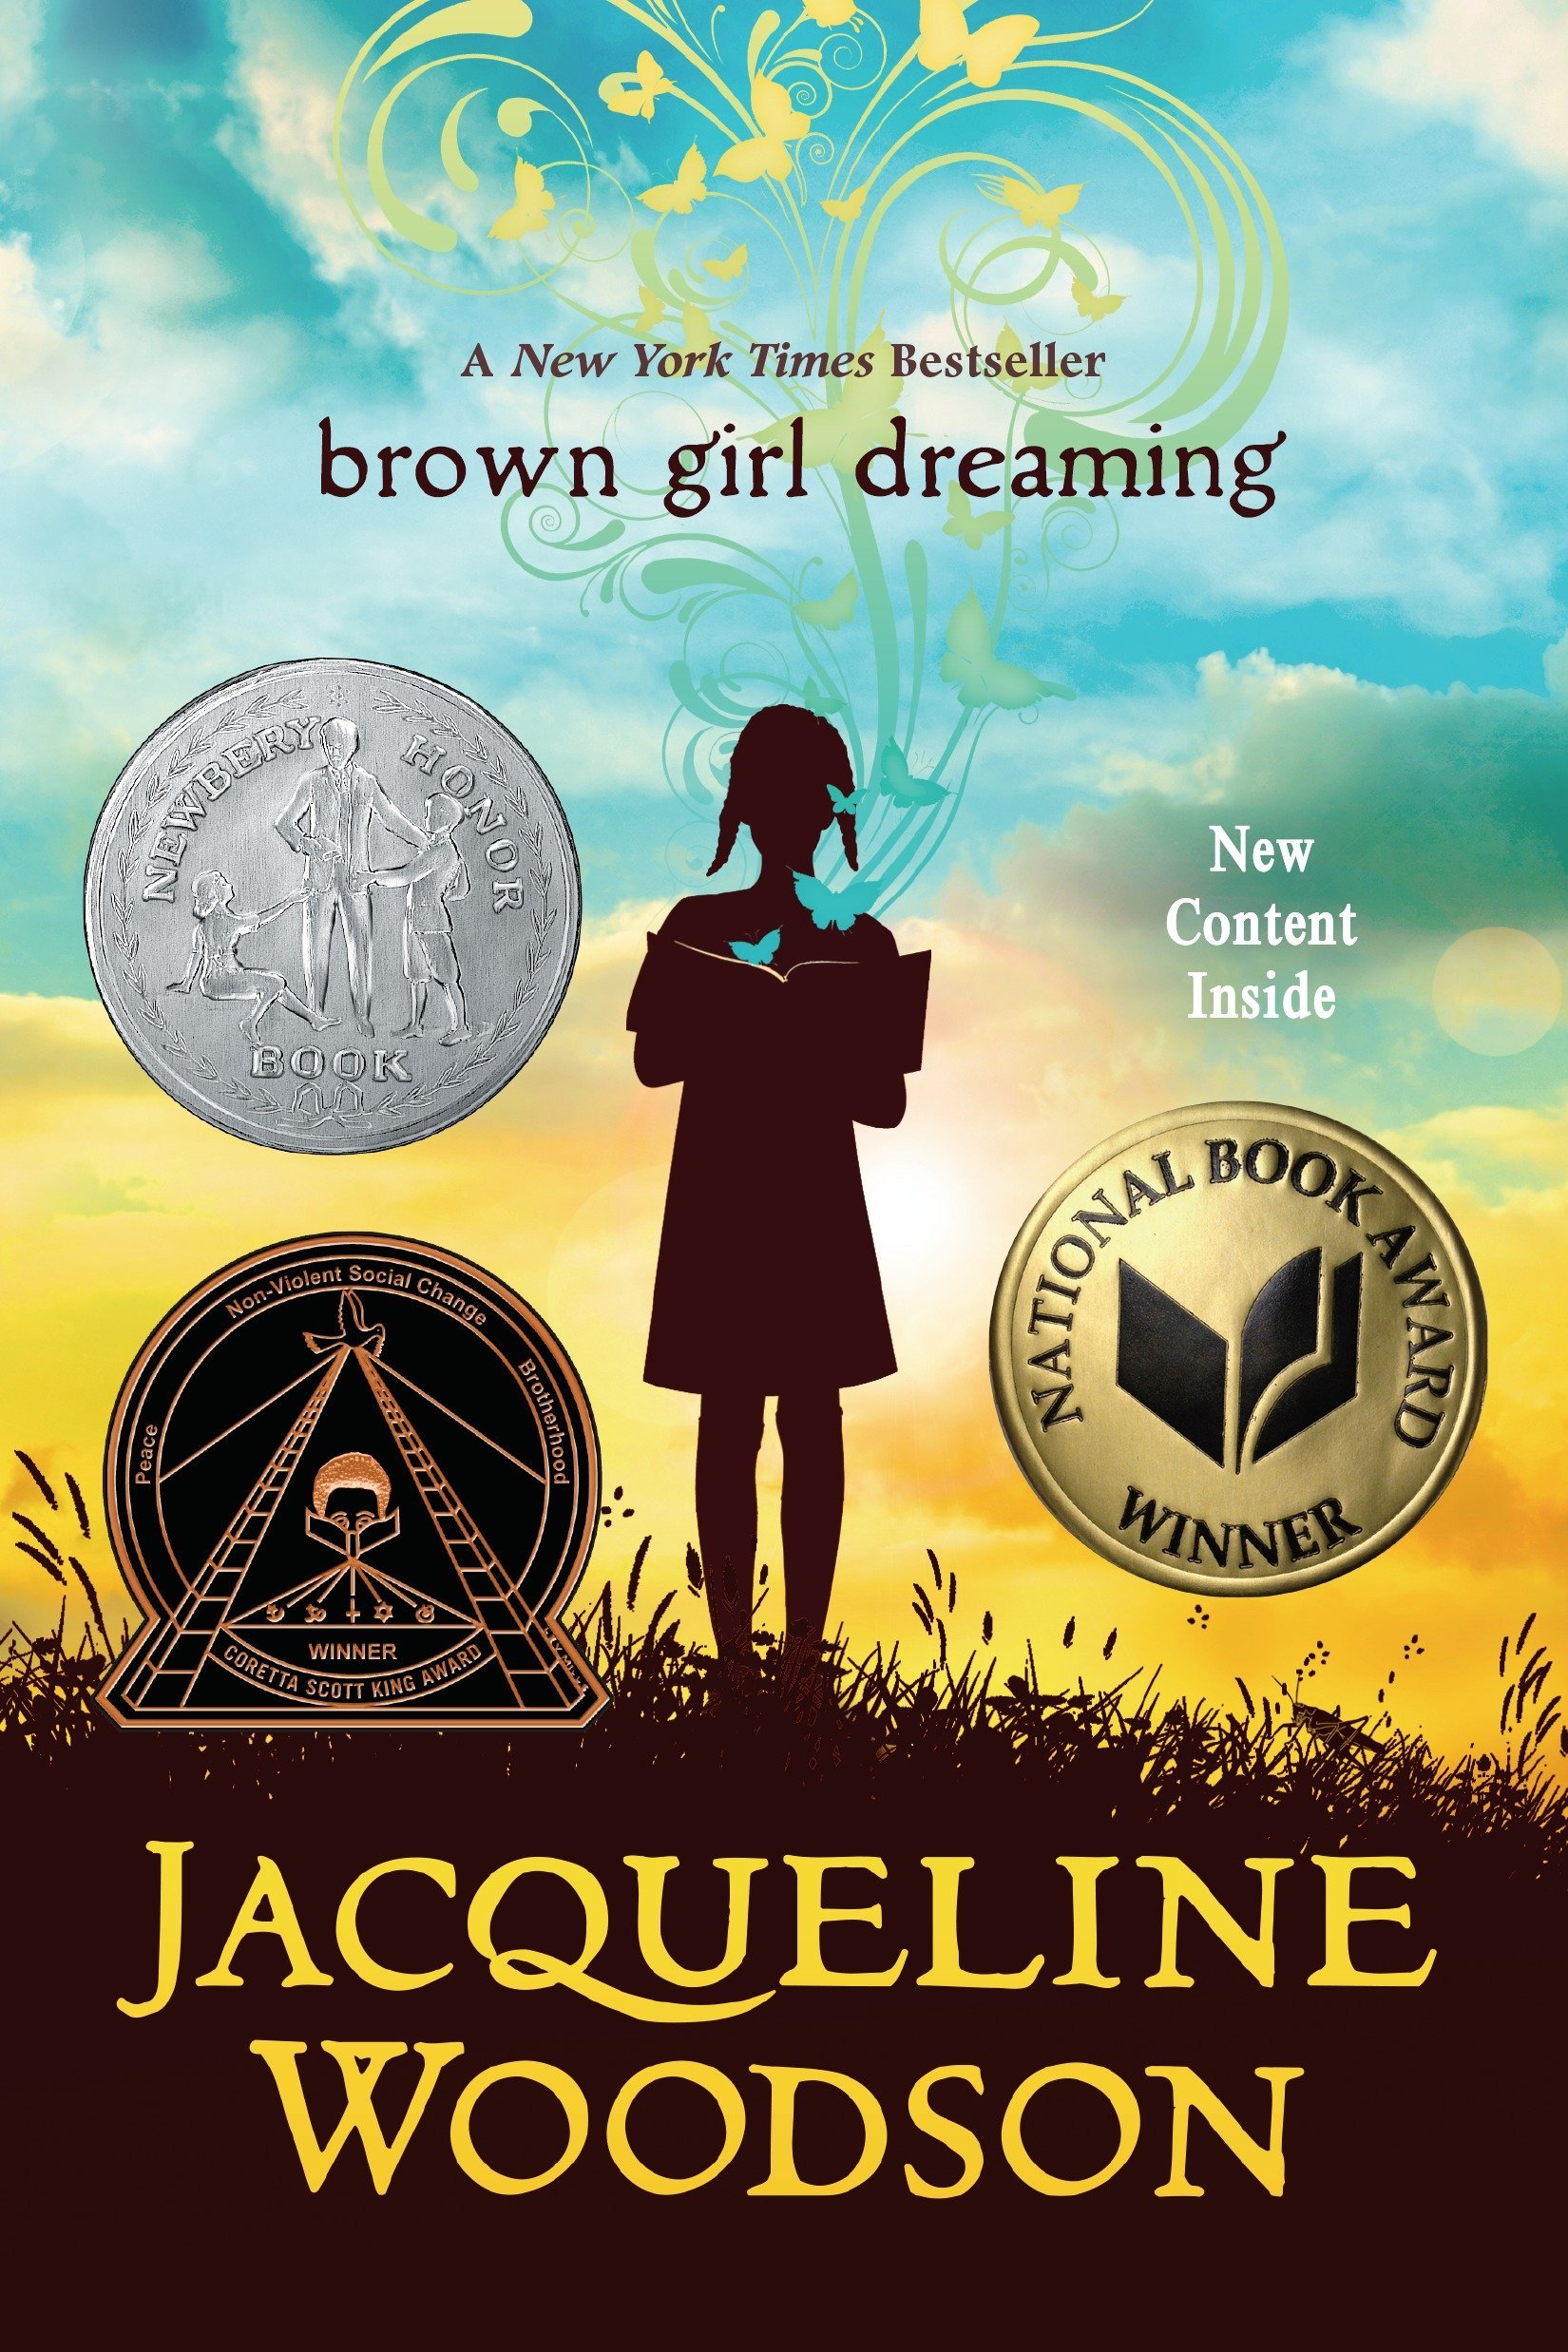 Tip for reluctant readers: Try novels written in verse like Brown Girl Dreaming by Jacqueline Woodson